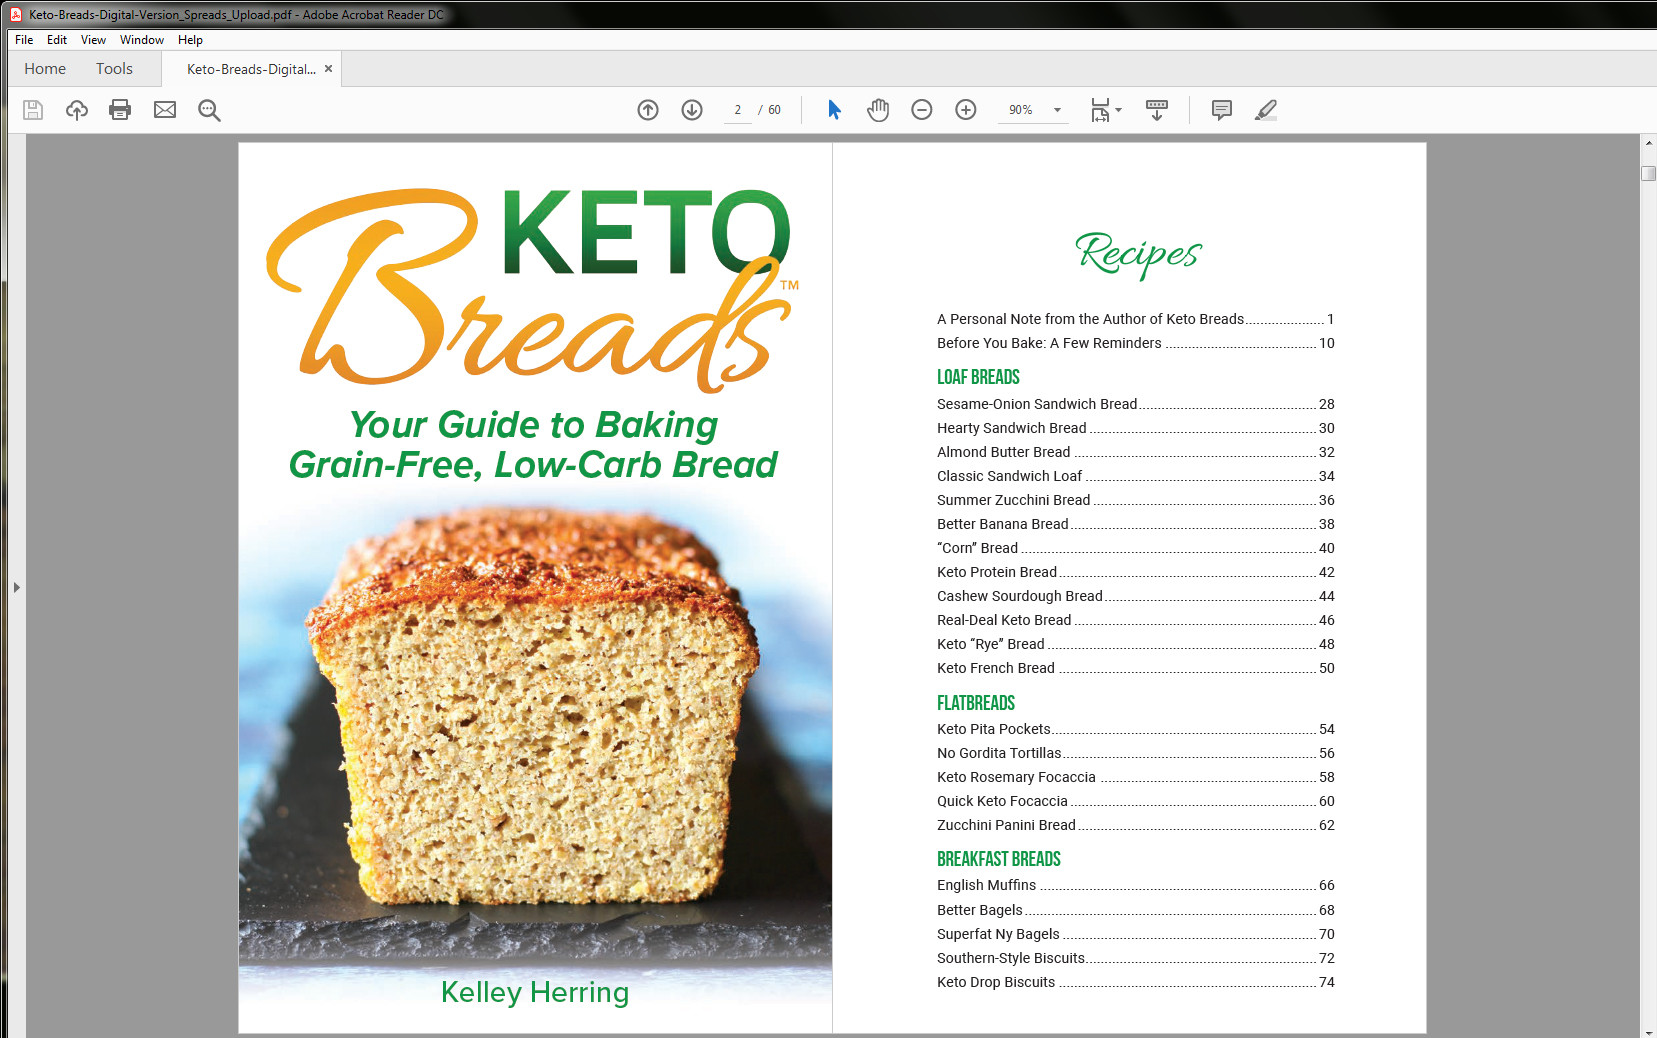 Keto Breads Table of Contents